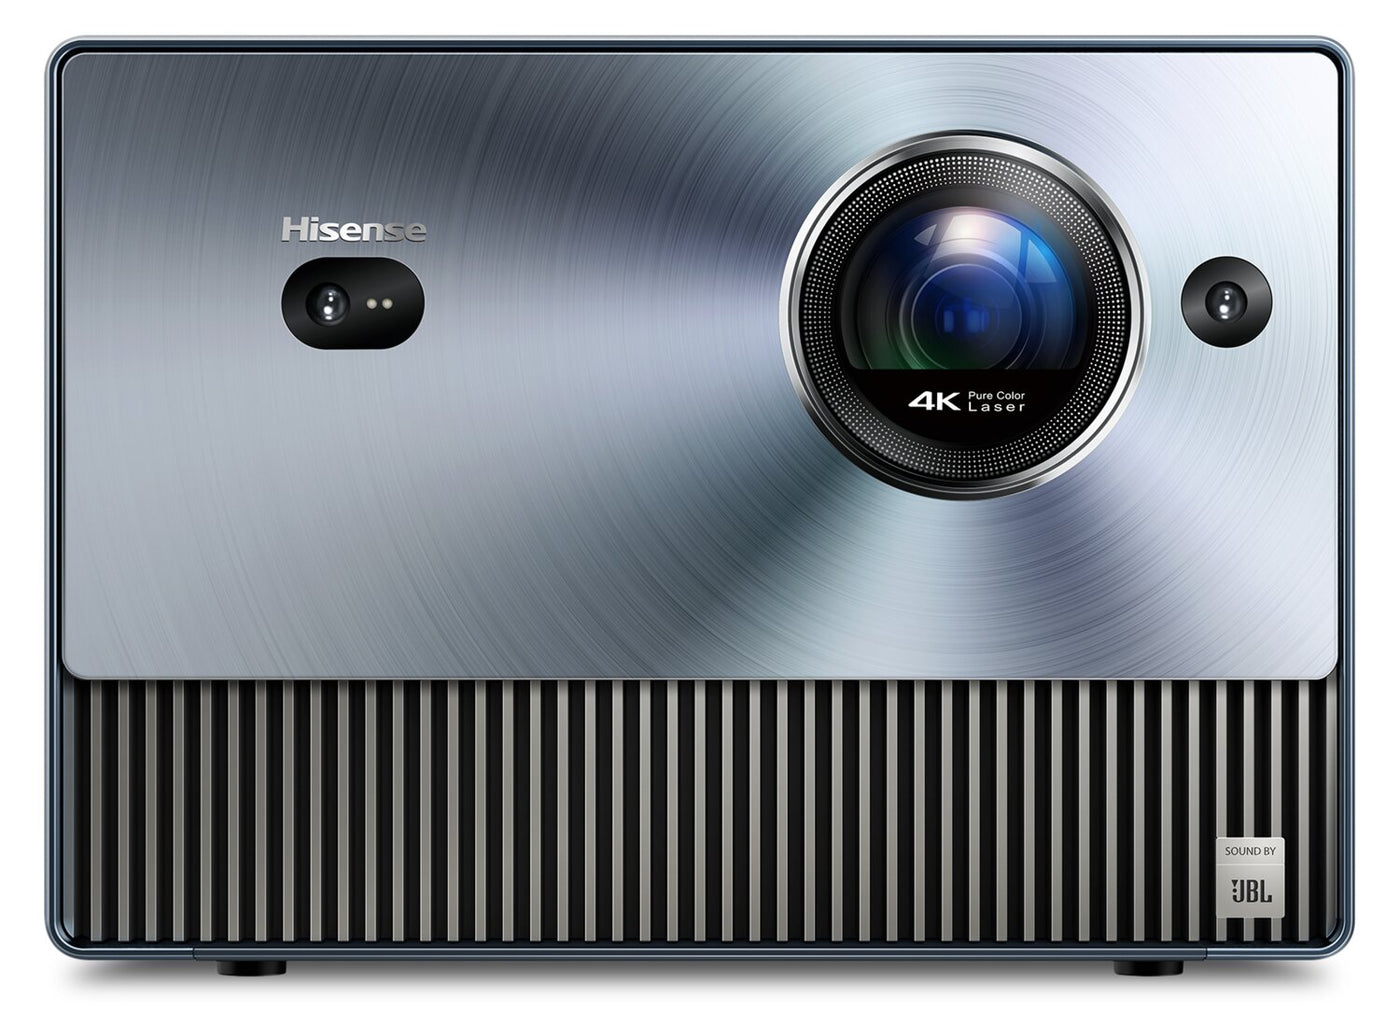 Hisense's C1 Laser Projector Offers A Compact Solution For A Huge